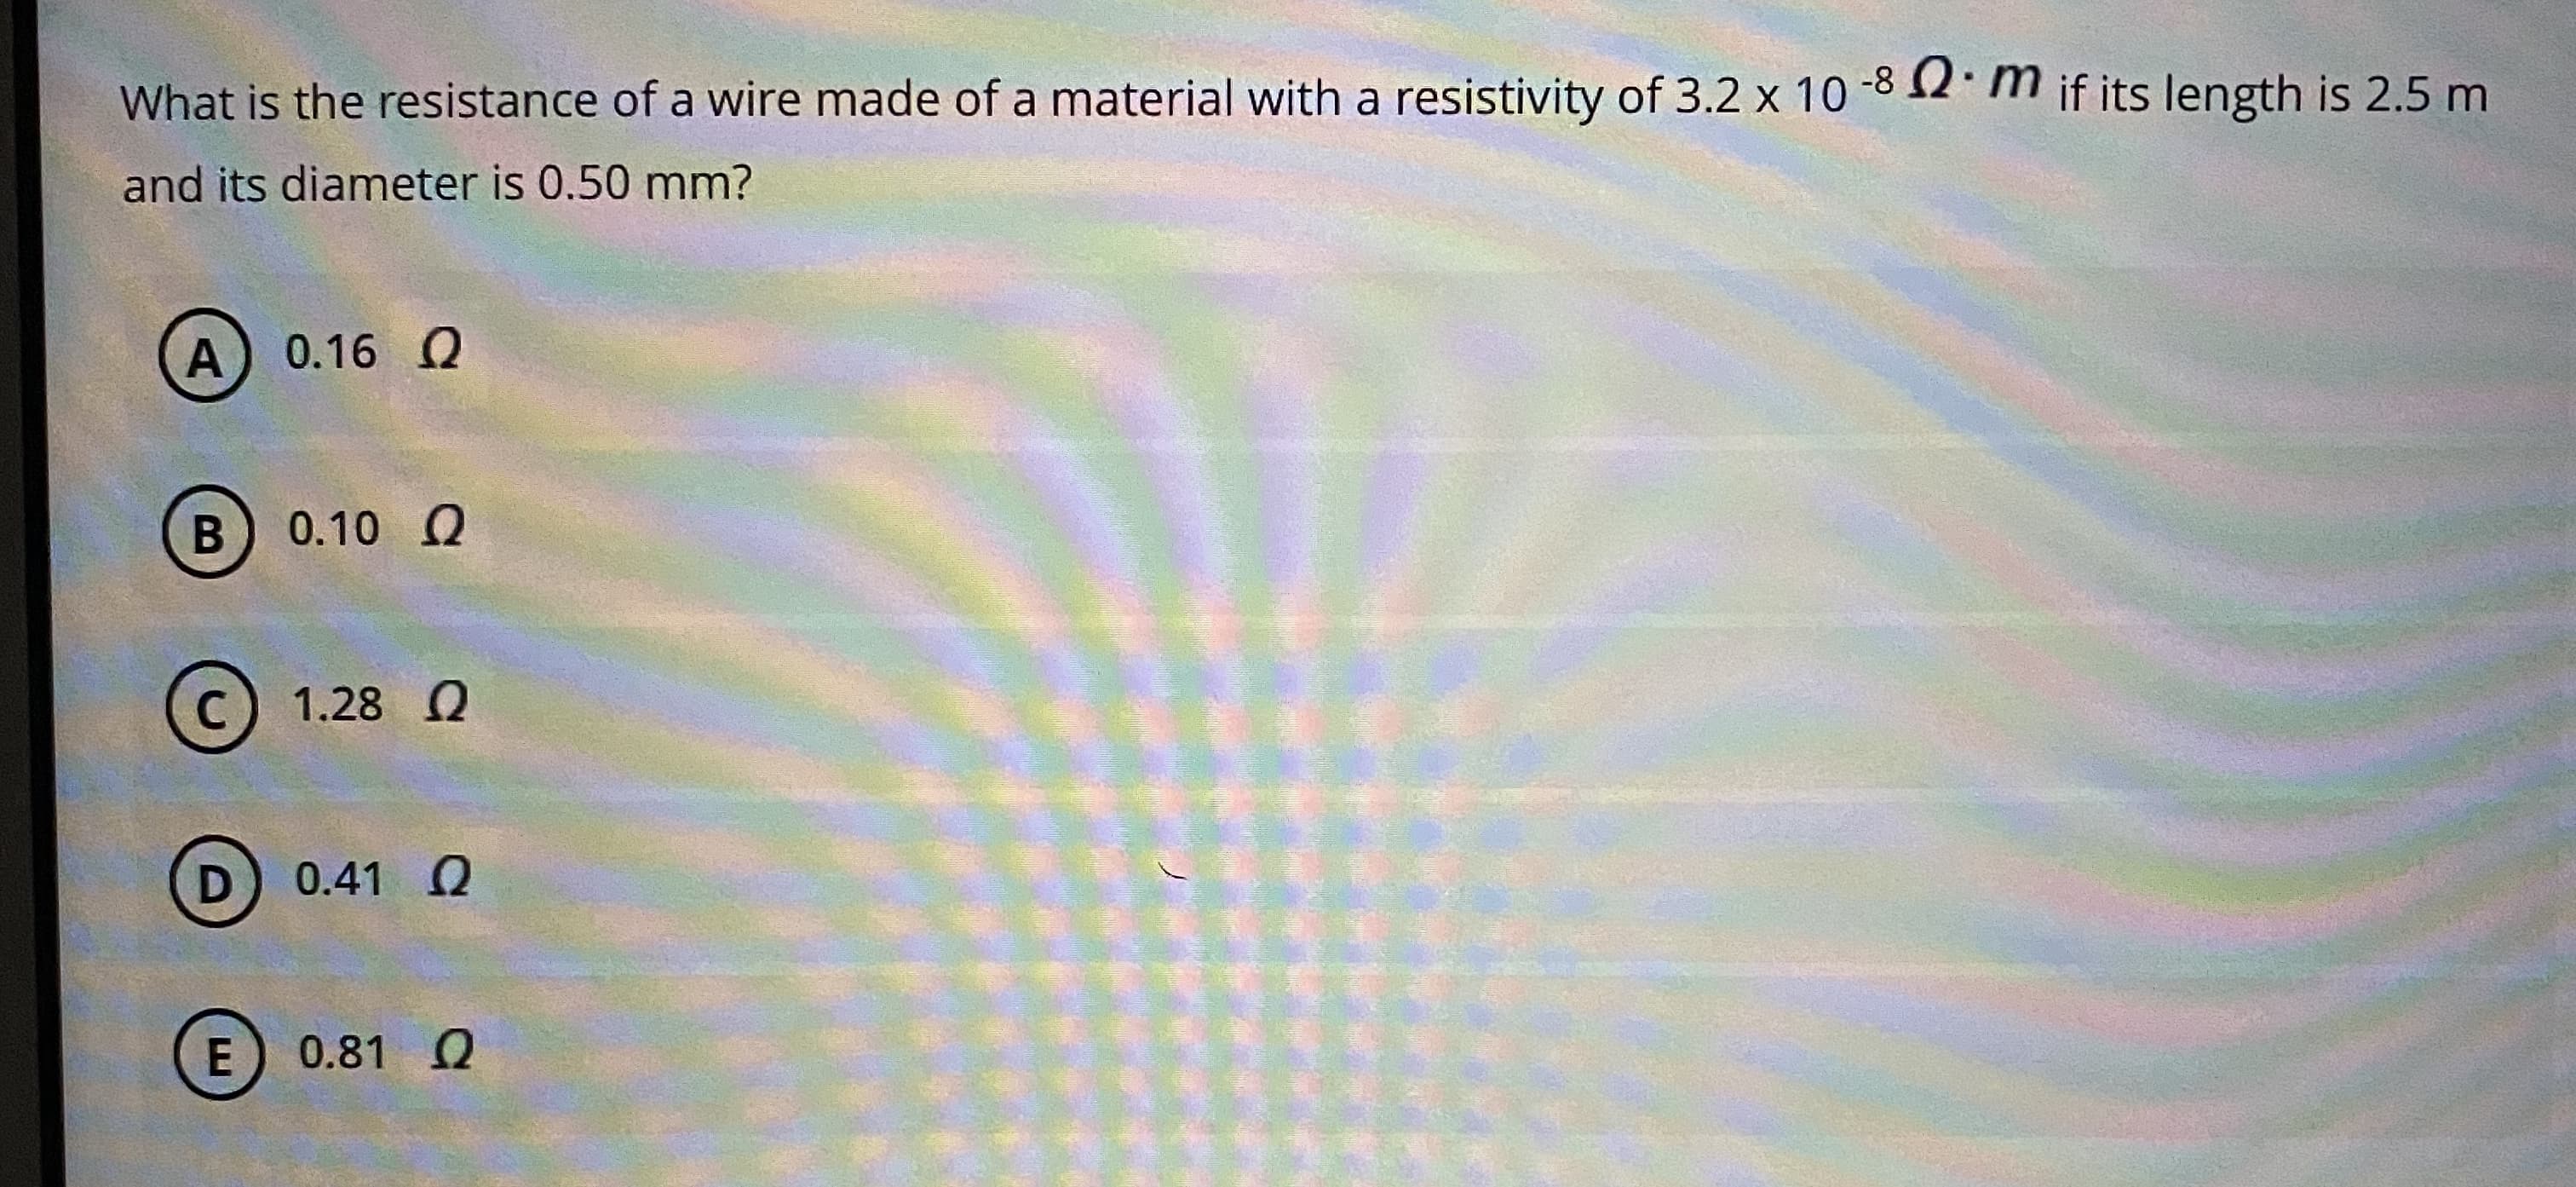 What is the resistance of a wire made of a material with a resistivity of 3.2 x 10 -8 12 m if its length is 2.5 m
and its diameter is 0.50 mm?
